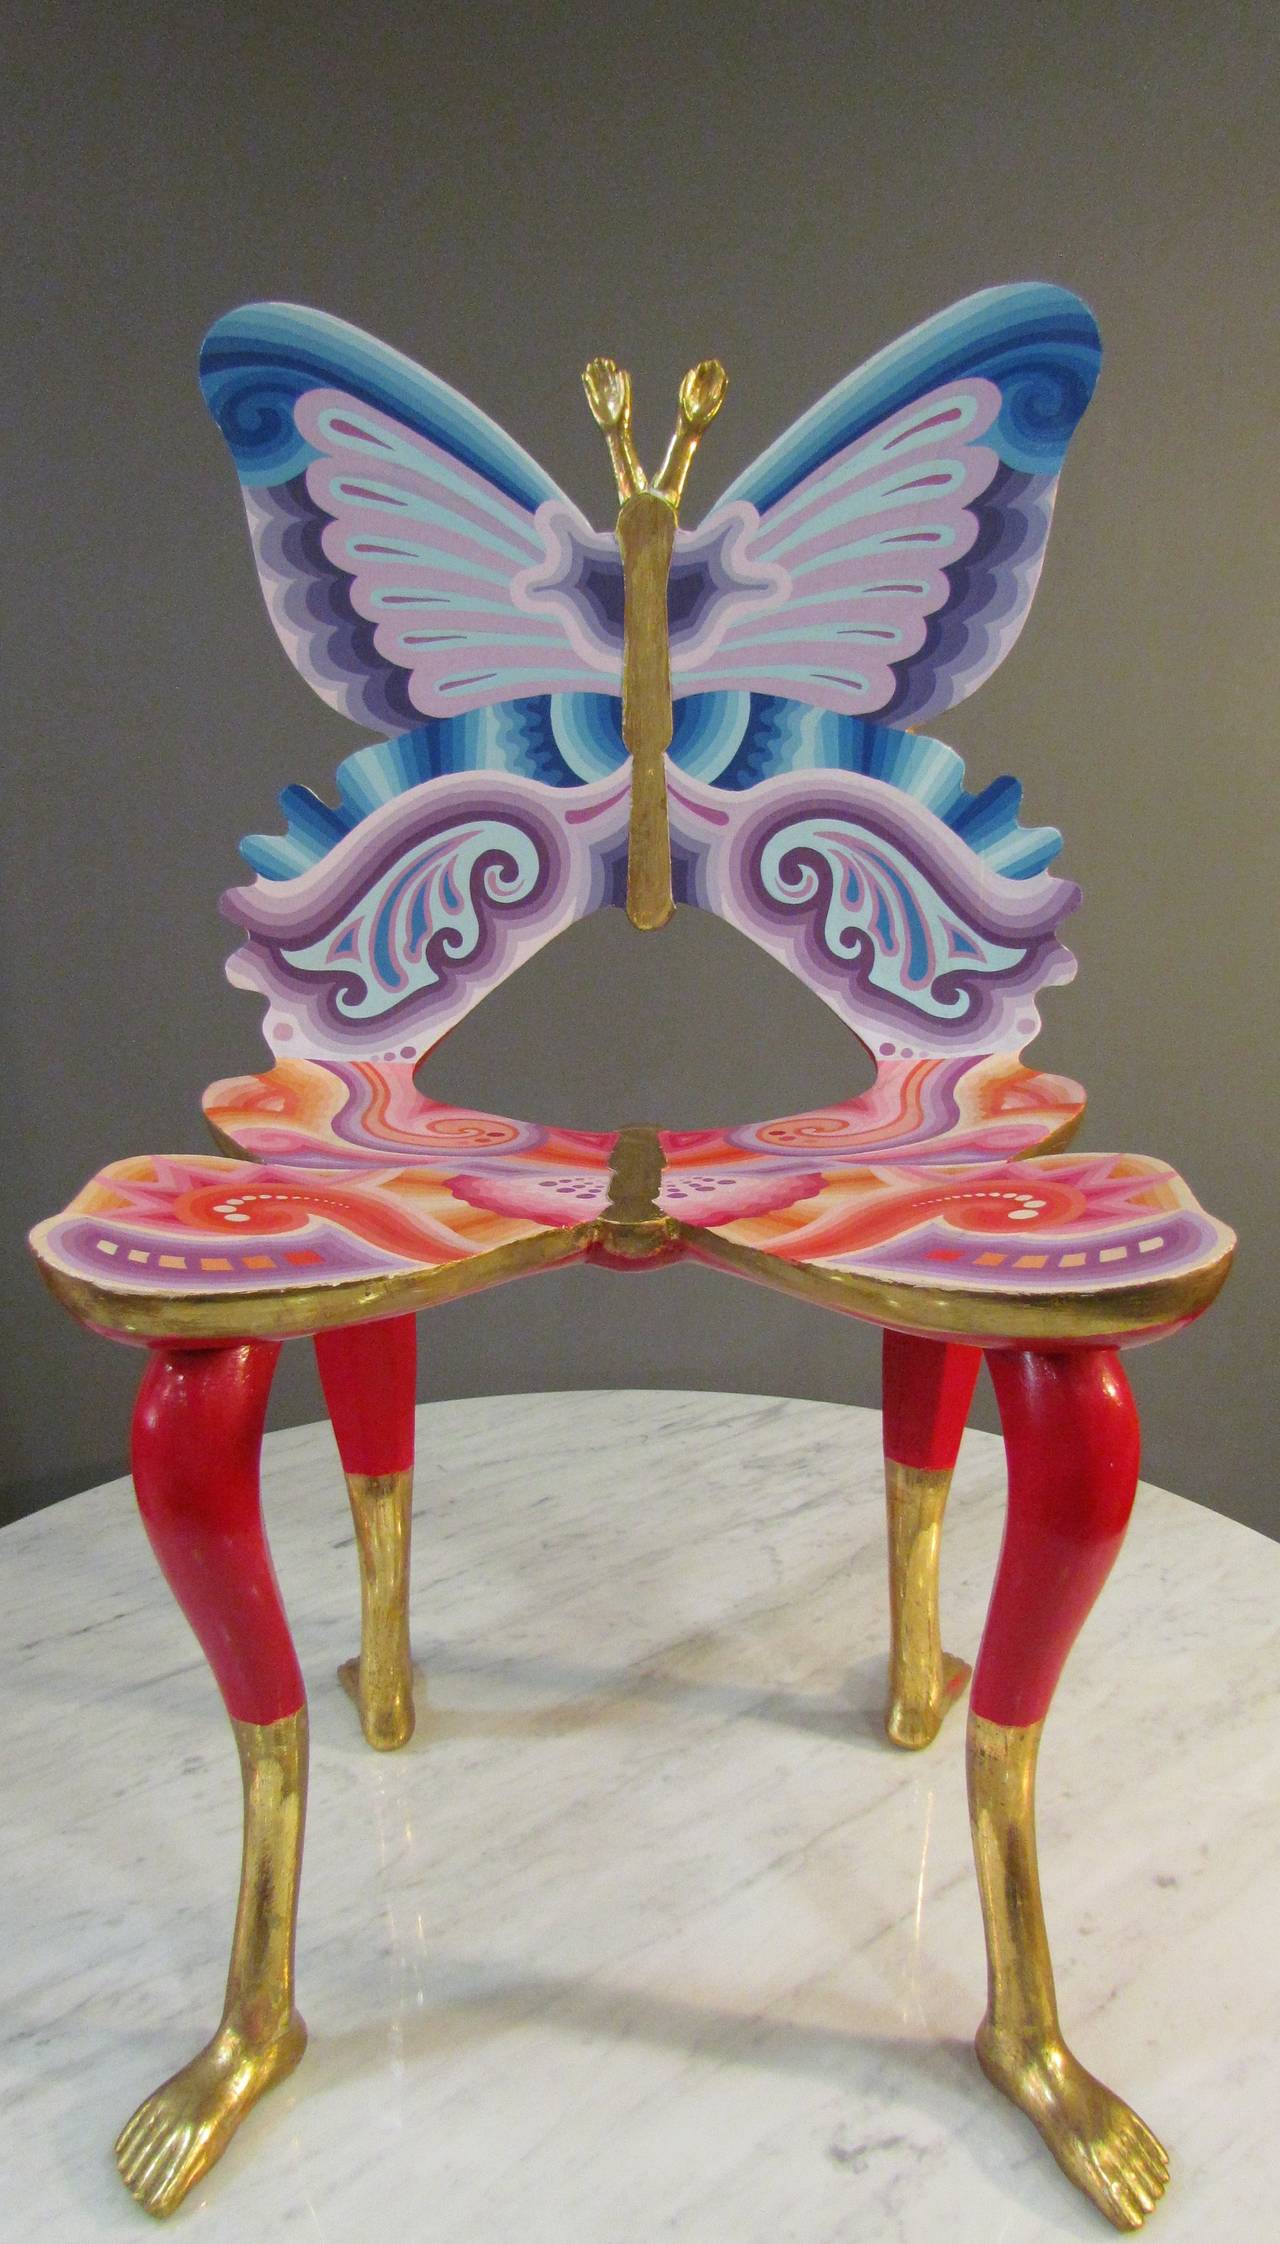 Mid-Century Modern Vintage Pedro Friedeberg Butterfly and Foot Chair, Full-Size, Mexico City, 1973 For Sale